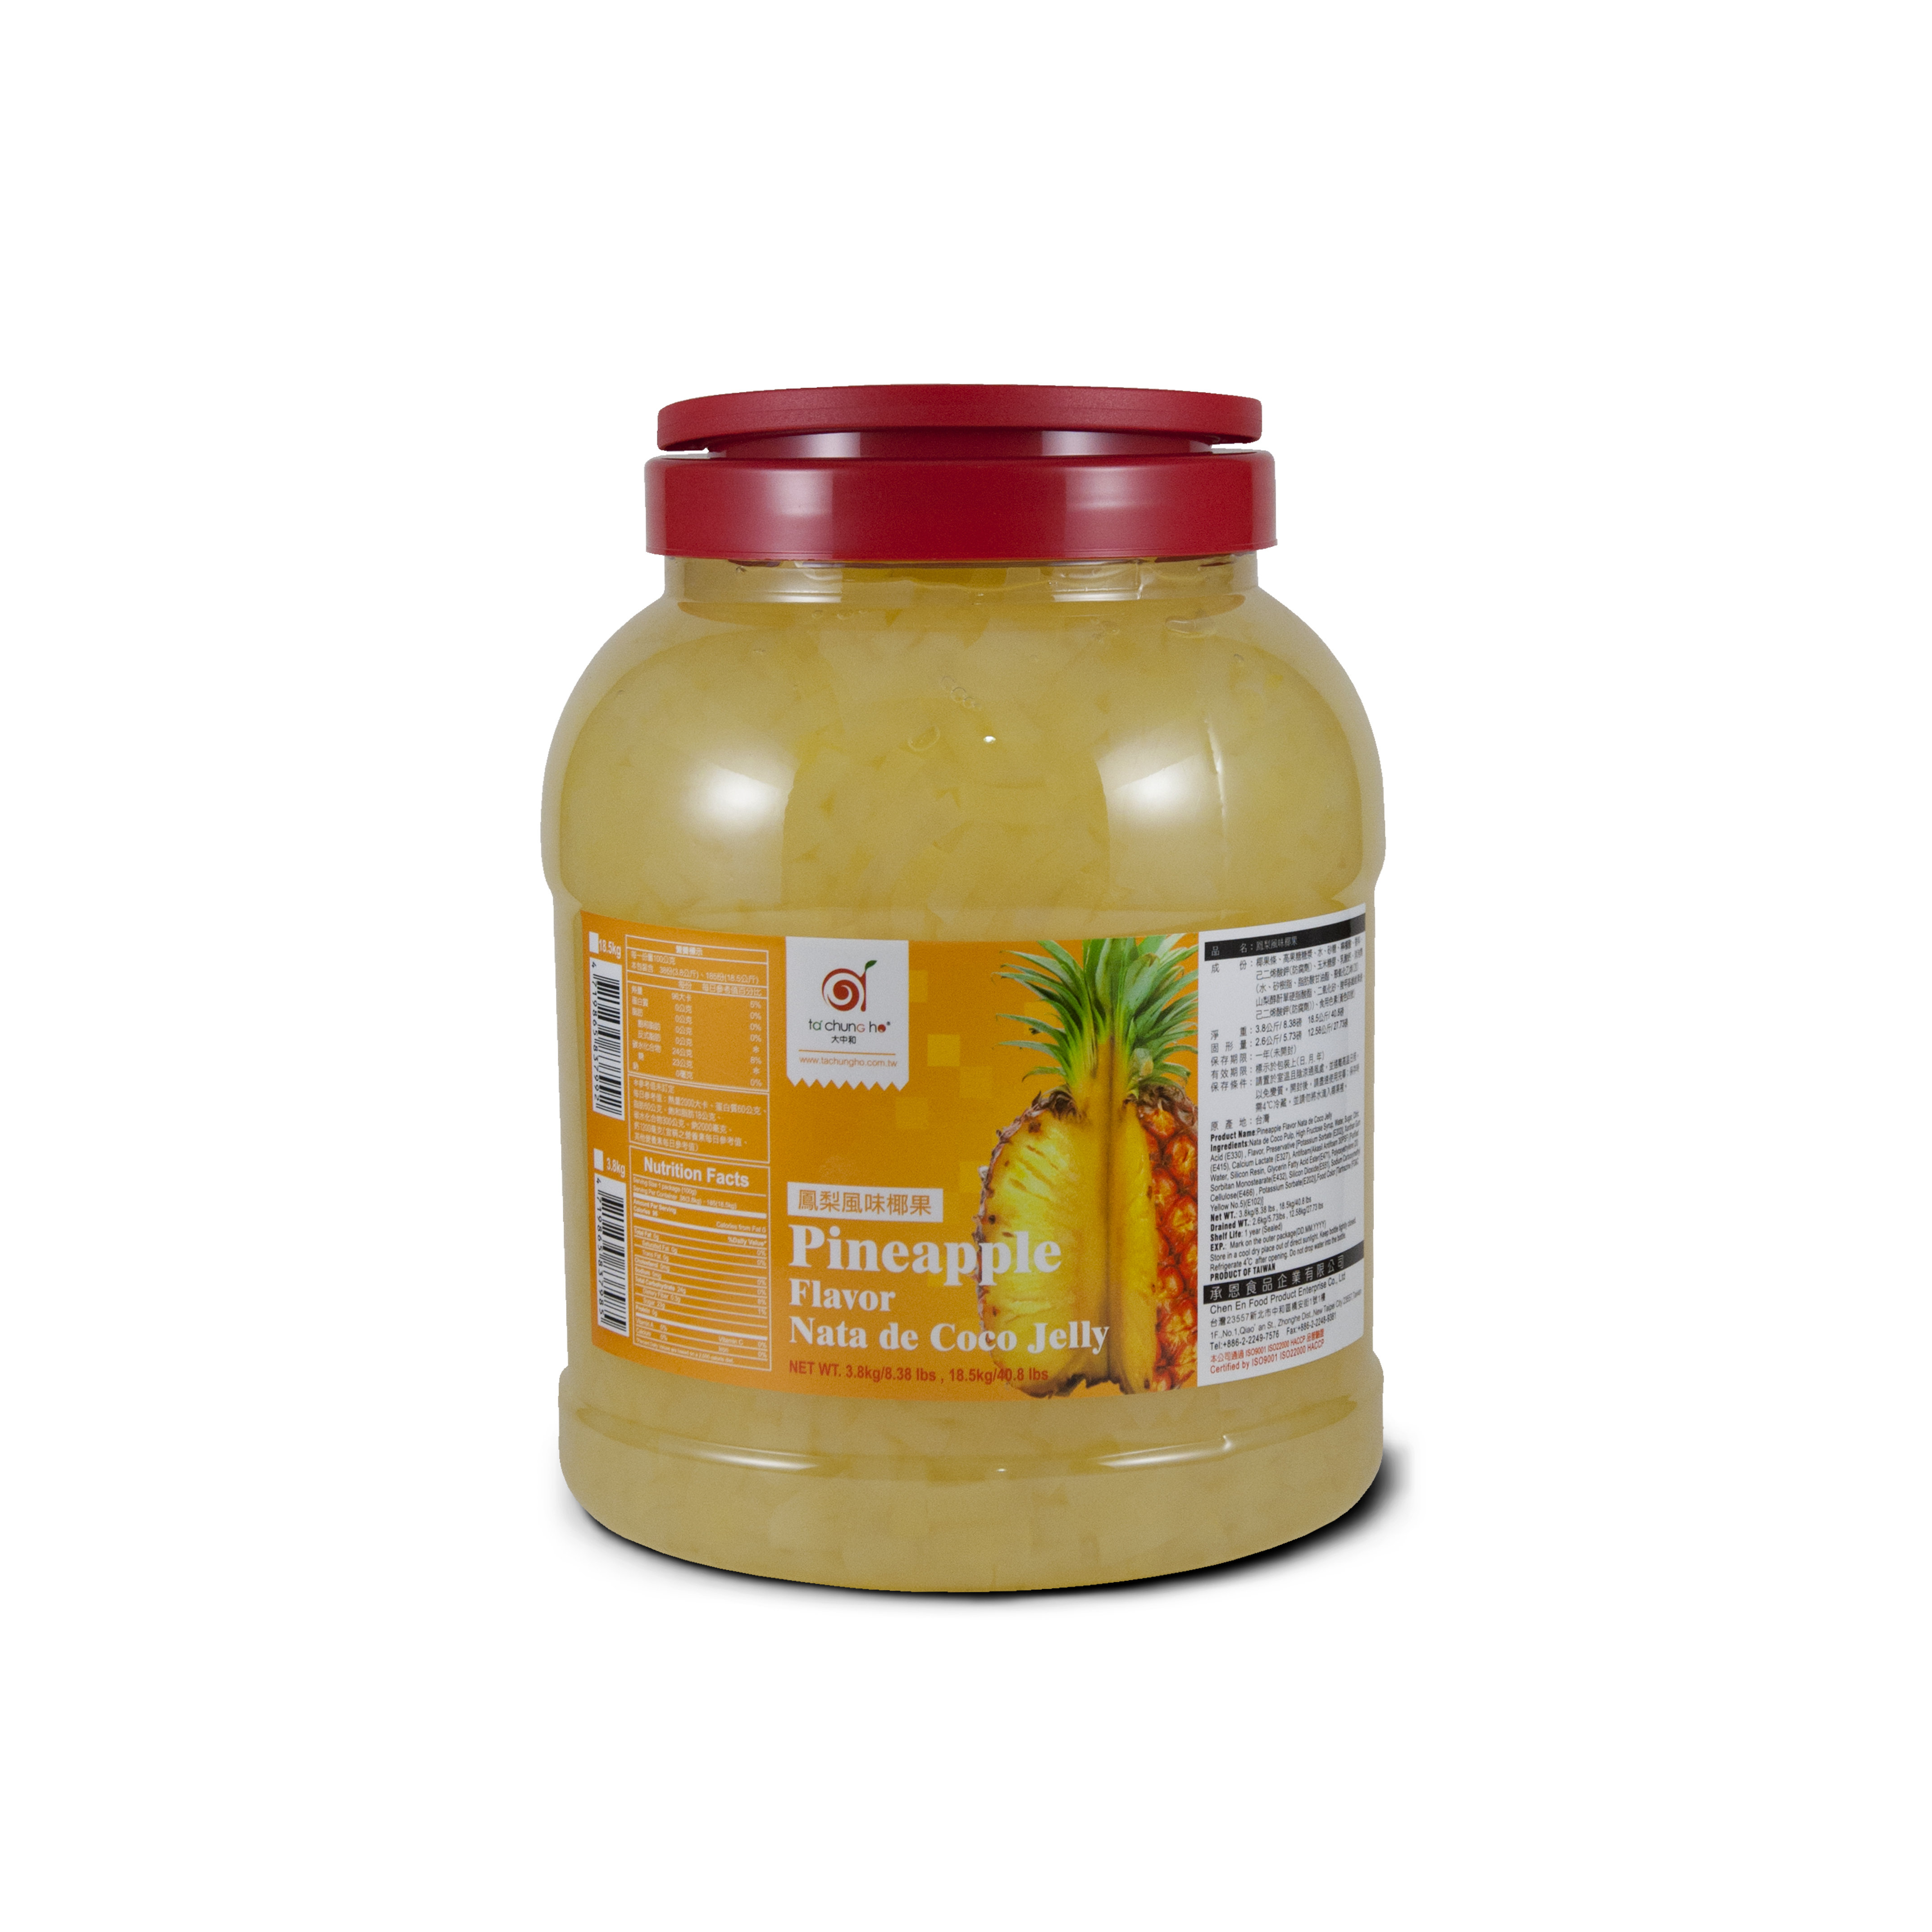 Pineapple Flavor Nata de Coco Jelly Package